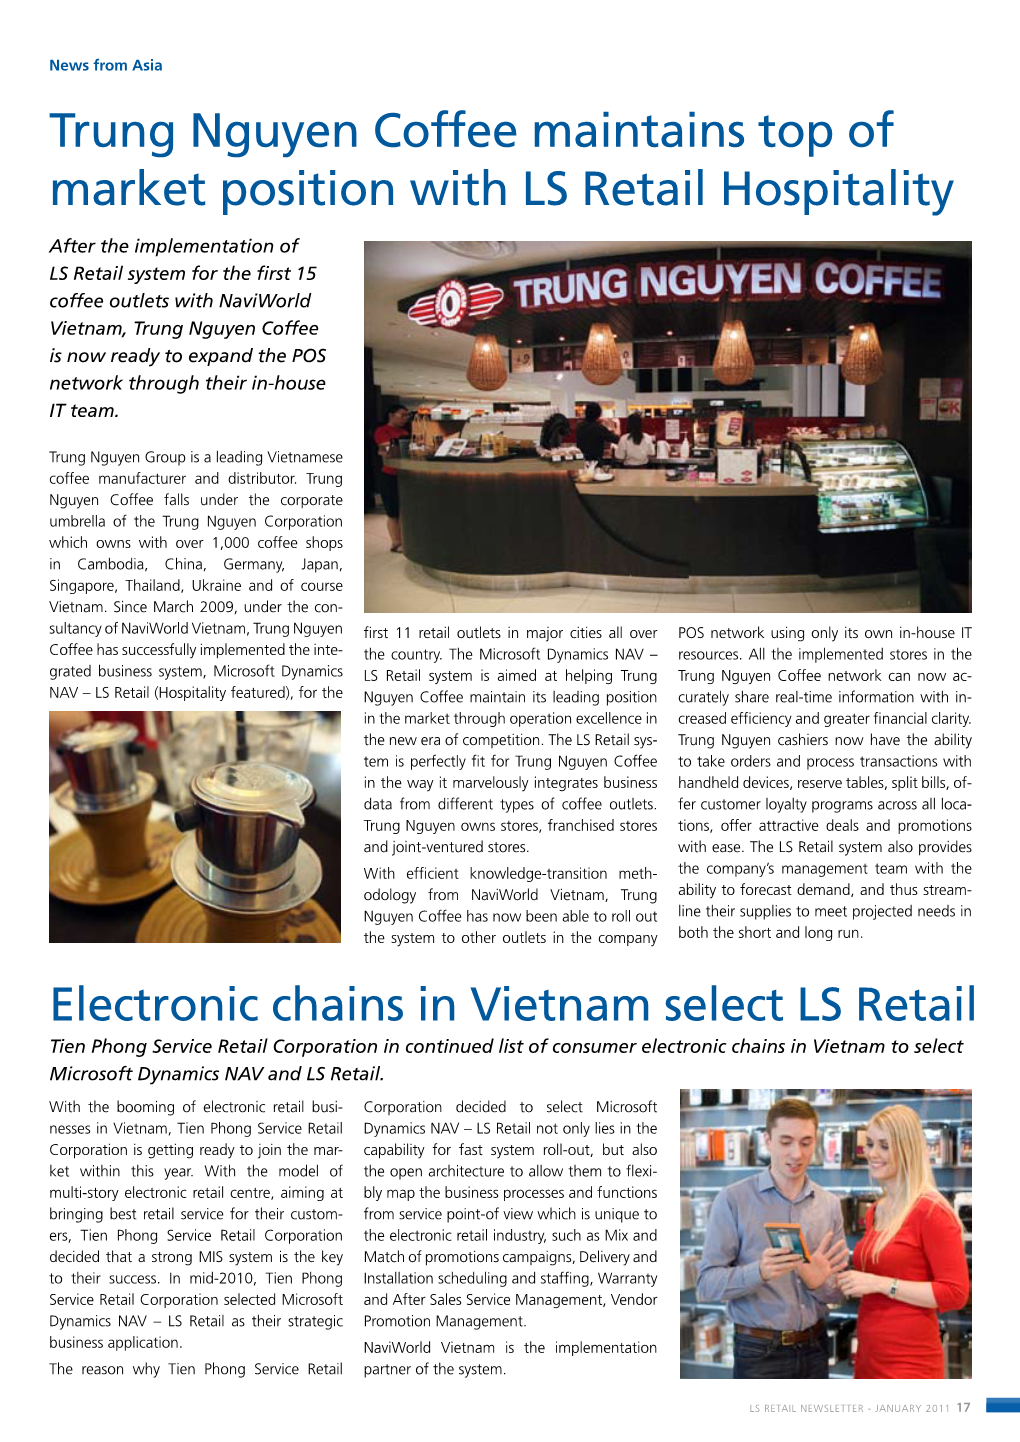 Trung Nguyen Coffee Maintains Top of Market Position with LS Retail Hospitality